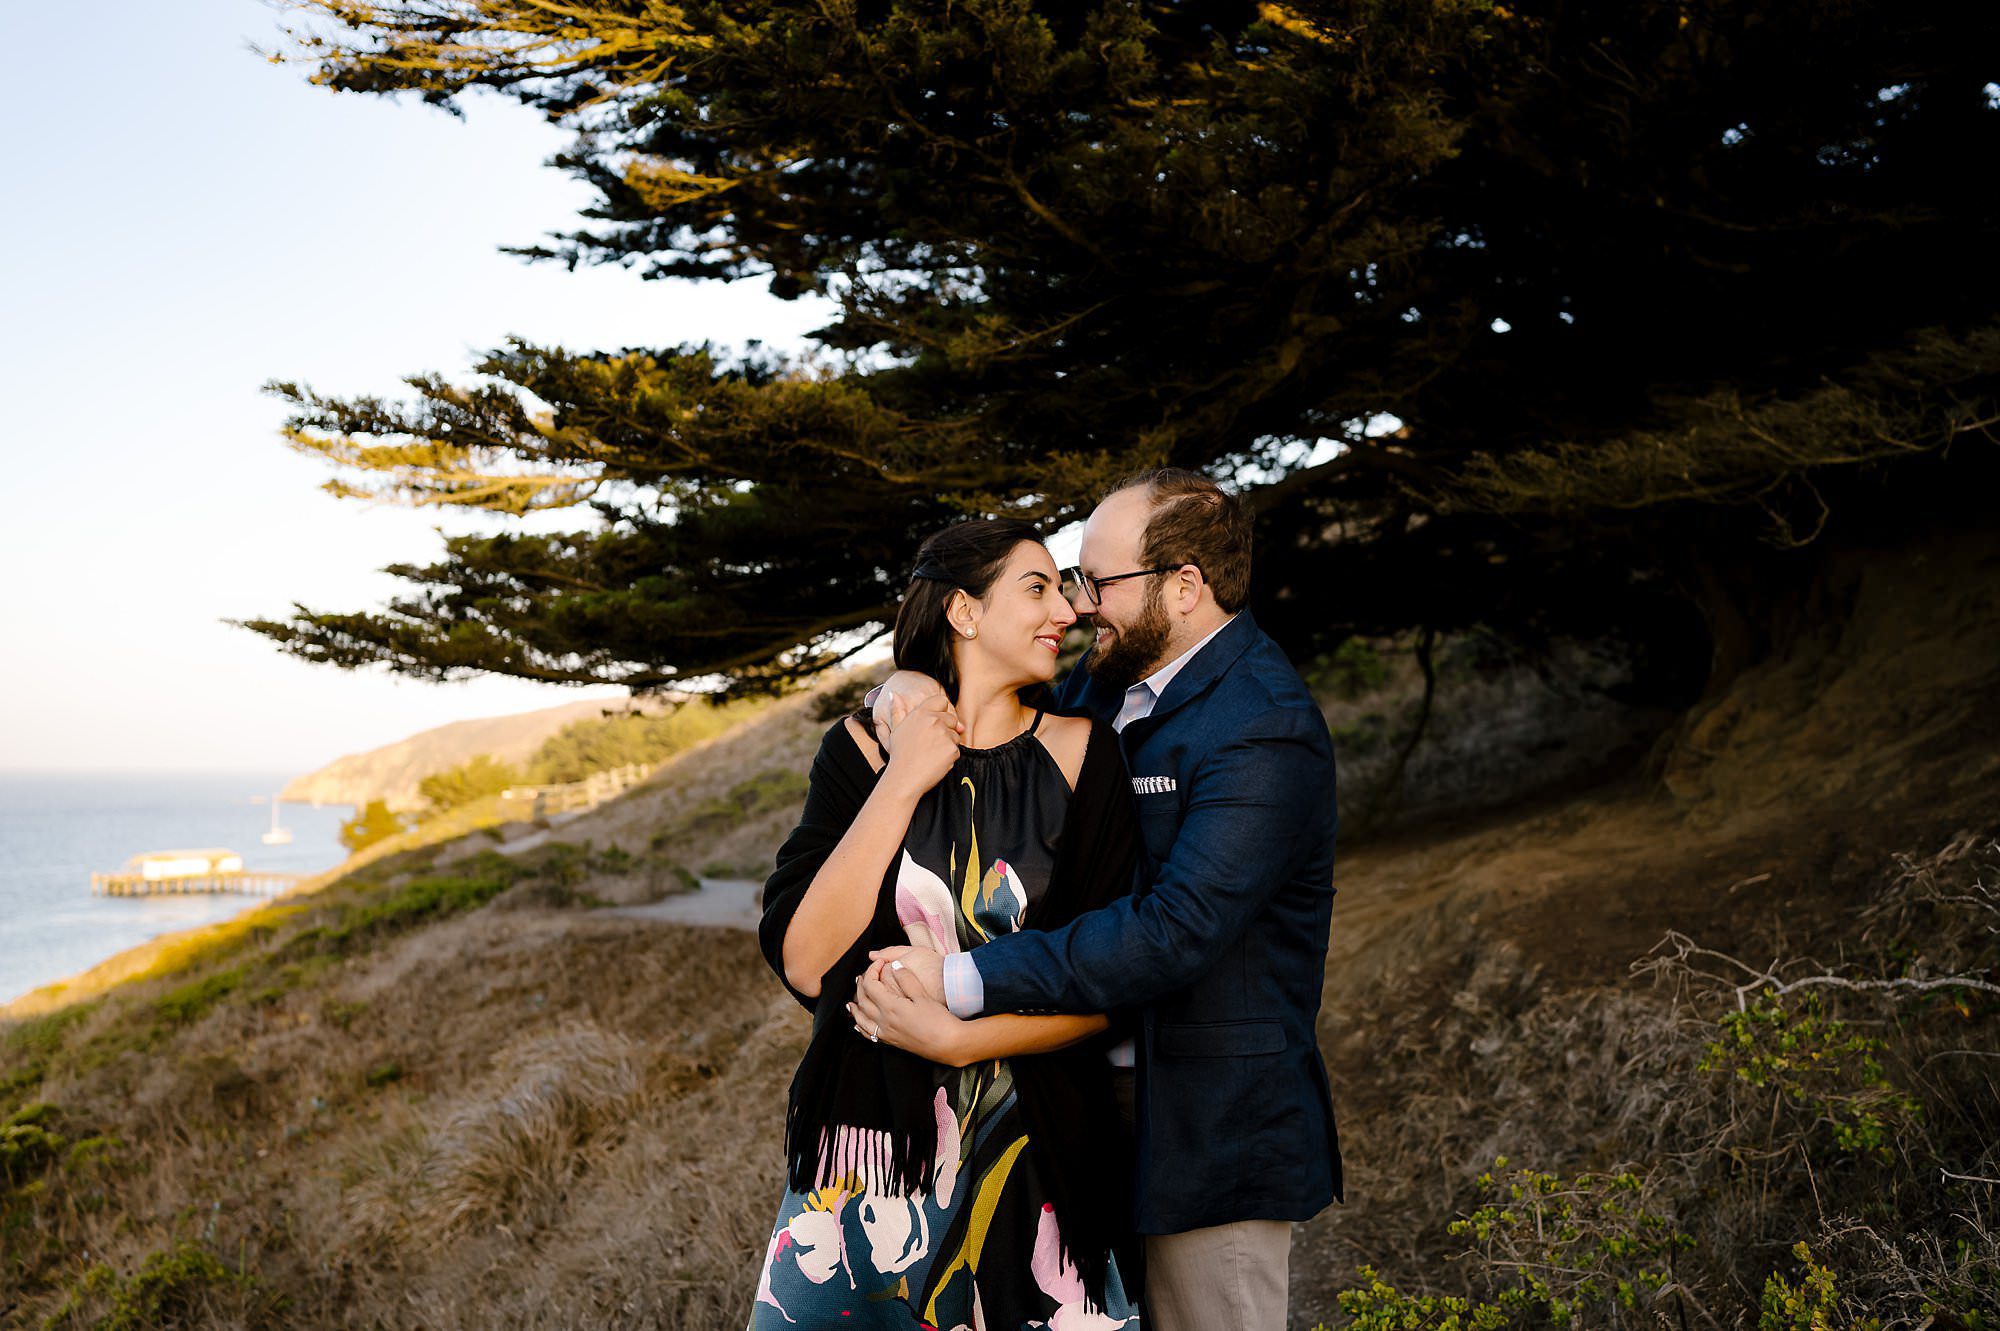 Engaged couple embracing closely during the sunset on a hike to Chimney Rock in Pt Reyes